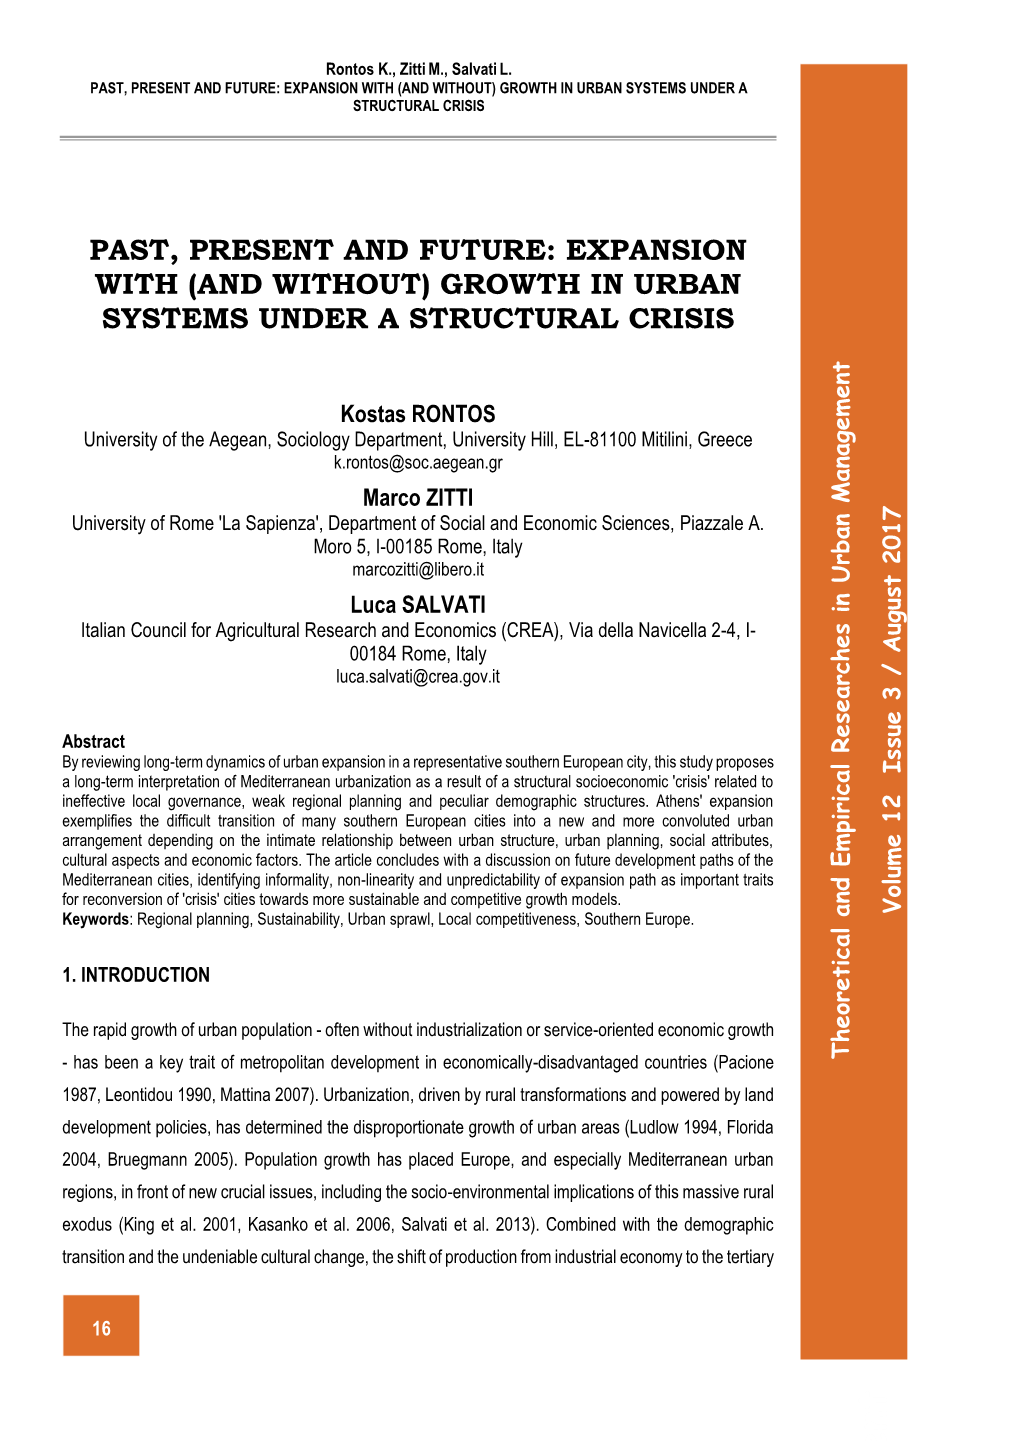 Past, Present and Future: Expansion with (And Without) Growth in Urban Systems Under a Structural Crisis